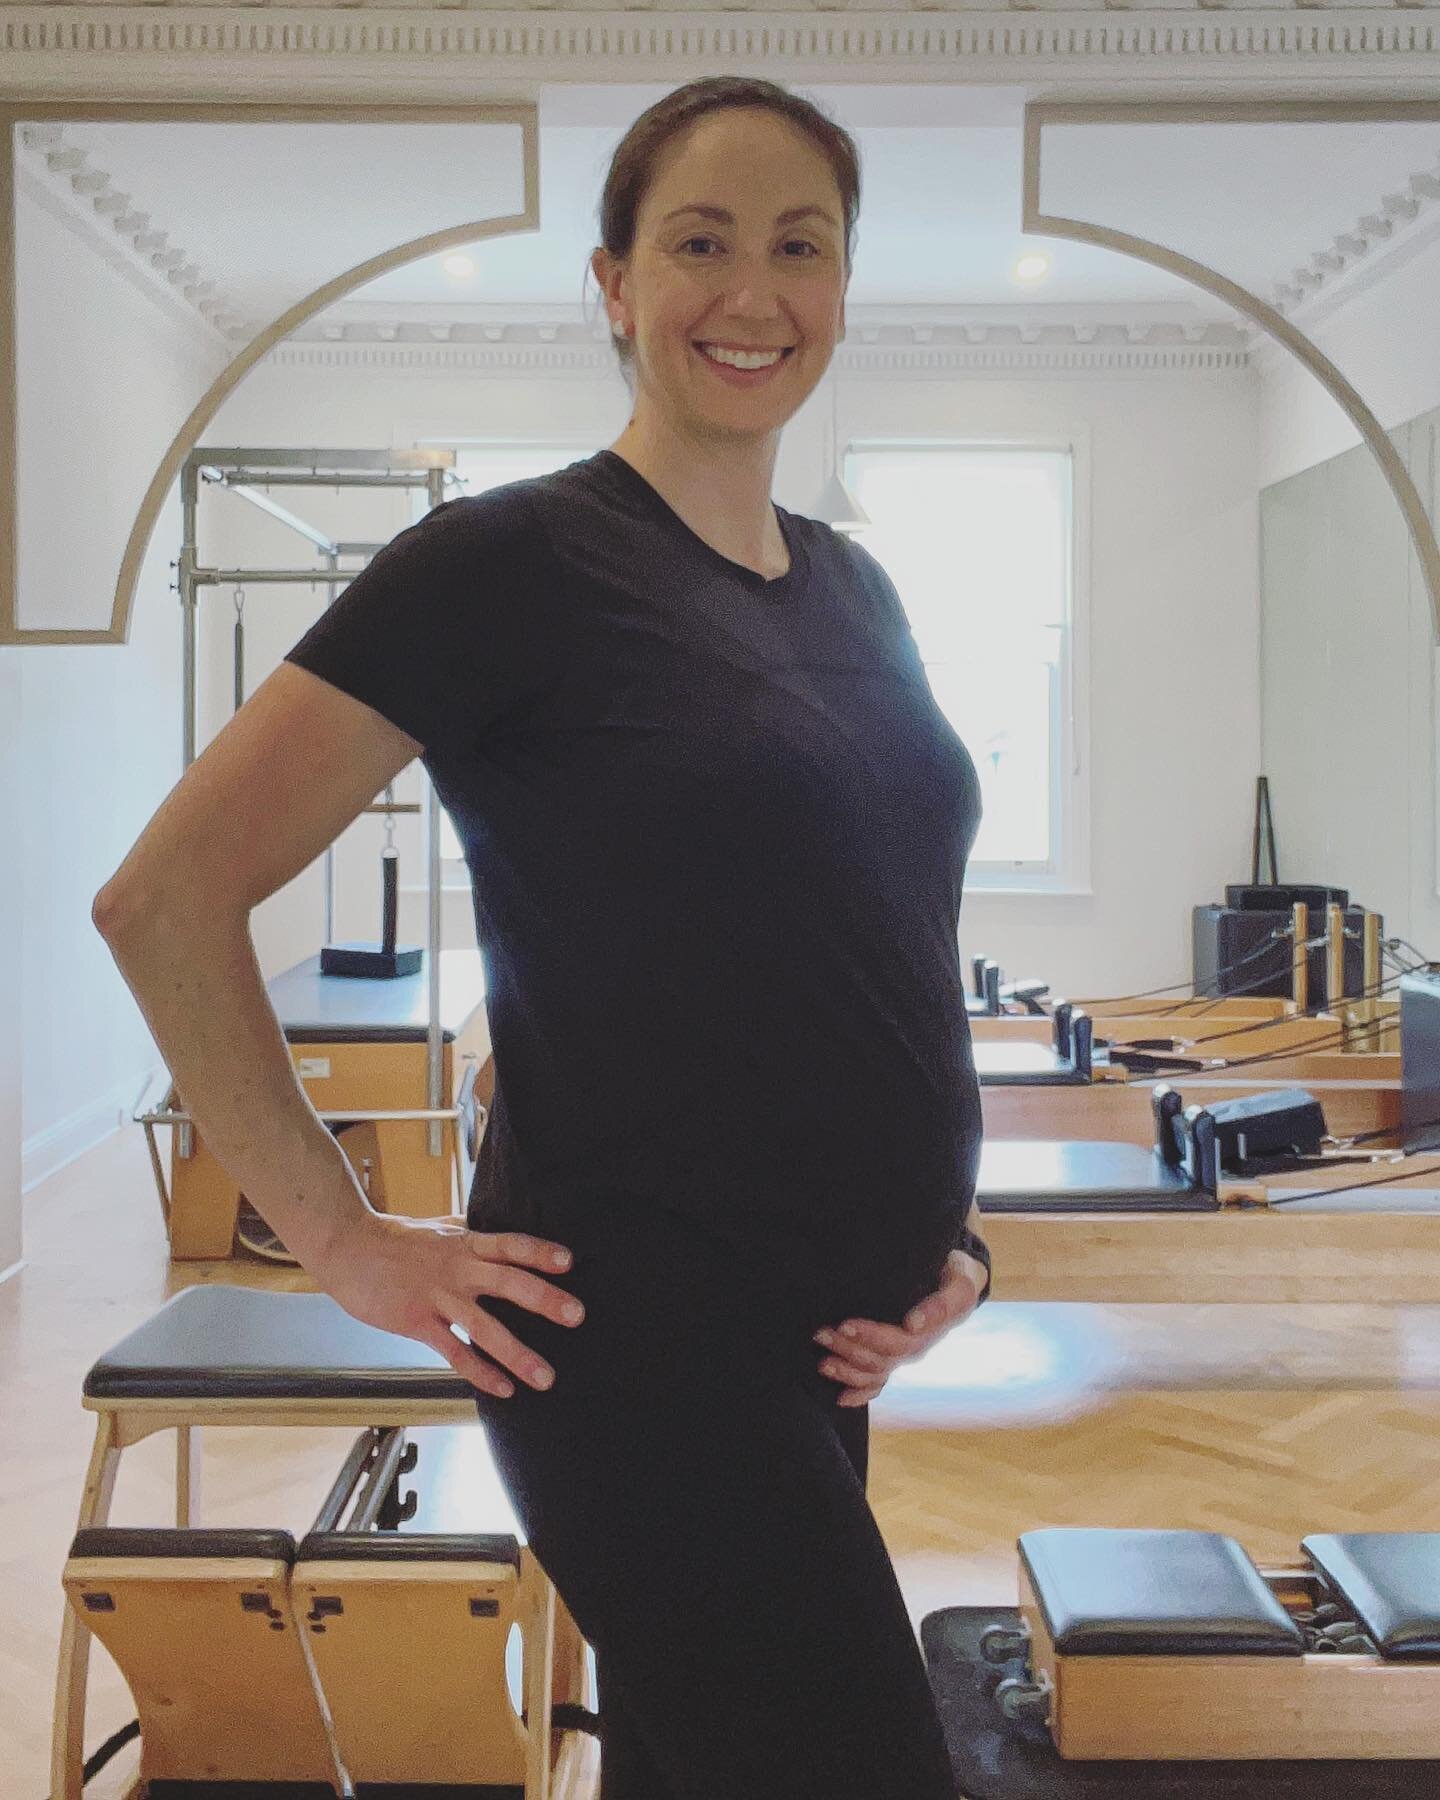 MATERNITY LEAVE 🤰🏻

Today was my last day of work for a little while&hellip;at a little over 36 weeks pregnant I&rsquo;m very happy to have (hopefully) a few weeks to put my feet up and try feel a bit more organised before bump&rsquo;s arrival. 🐣
